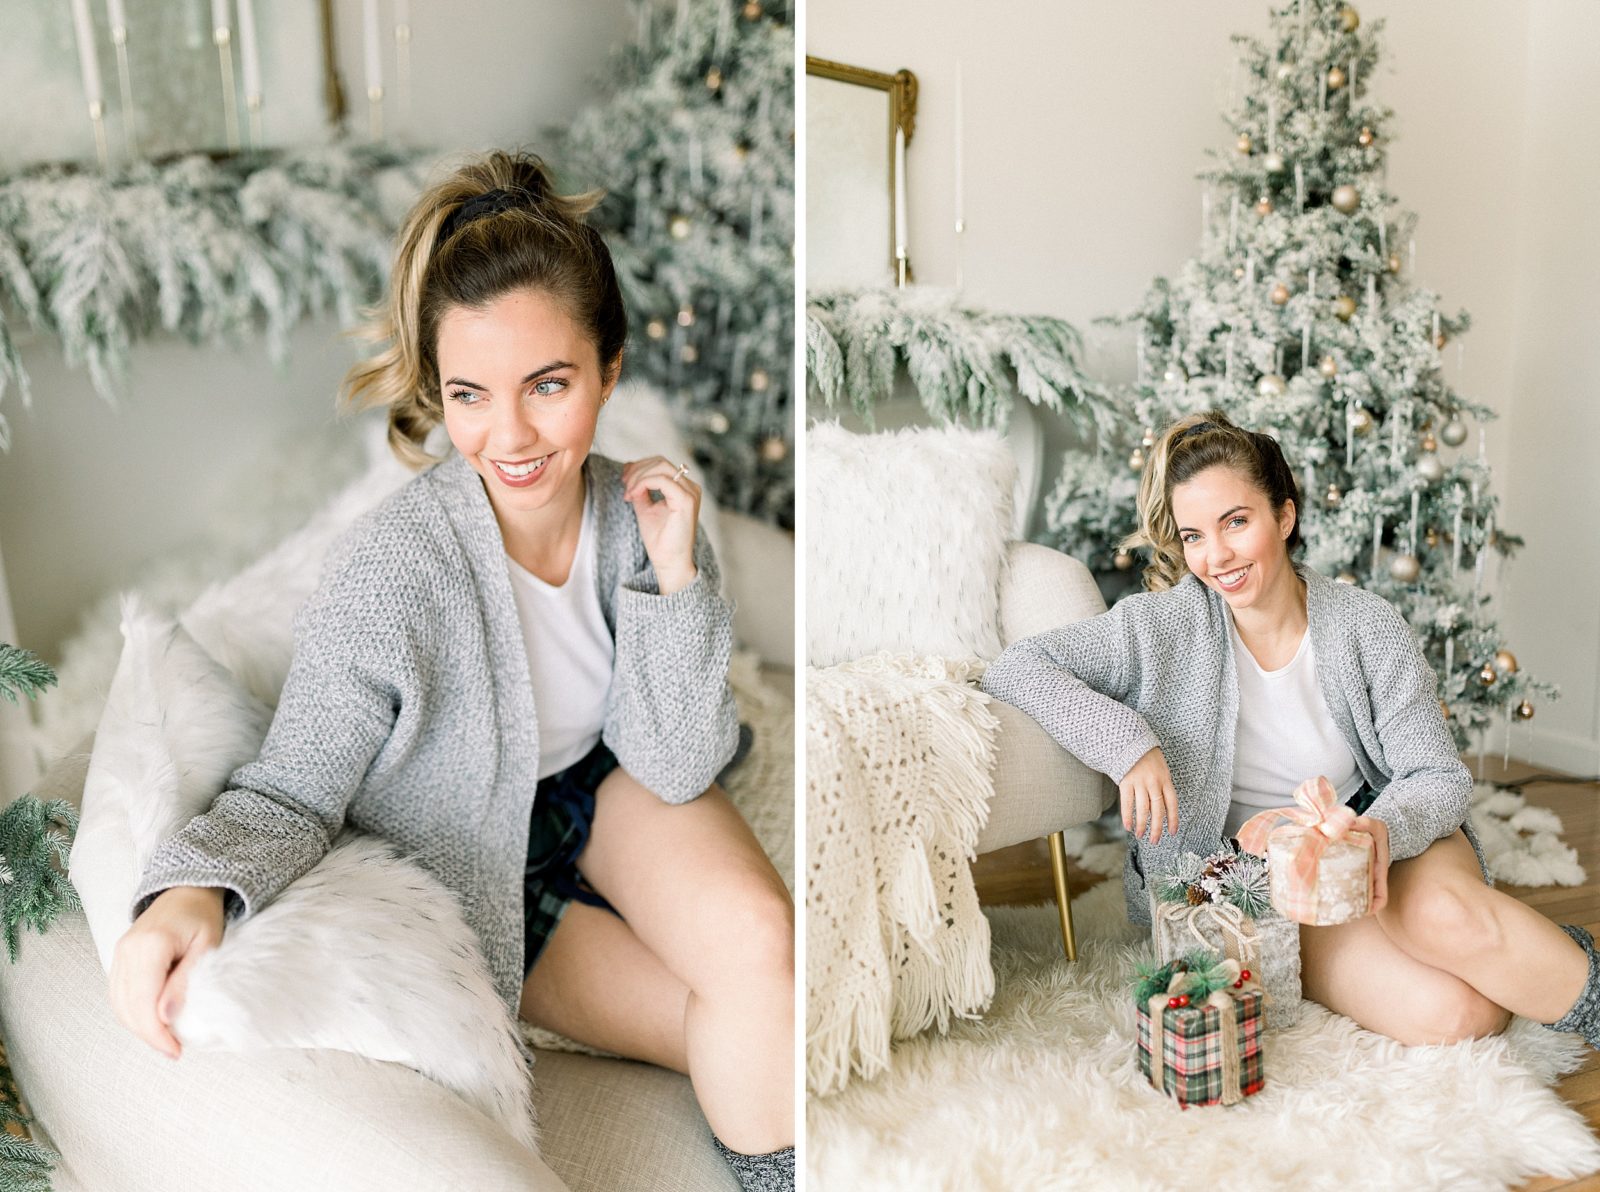 Woman sitting on a living room holding gifts and living room has Christmas decorations.